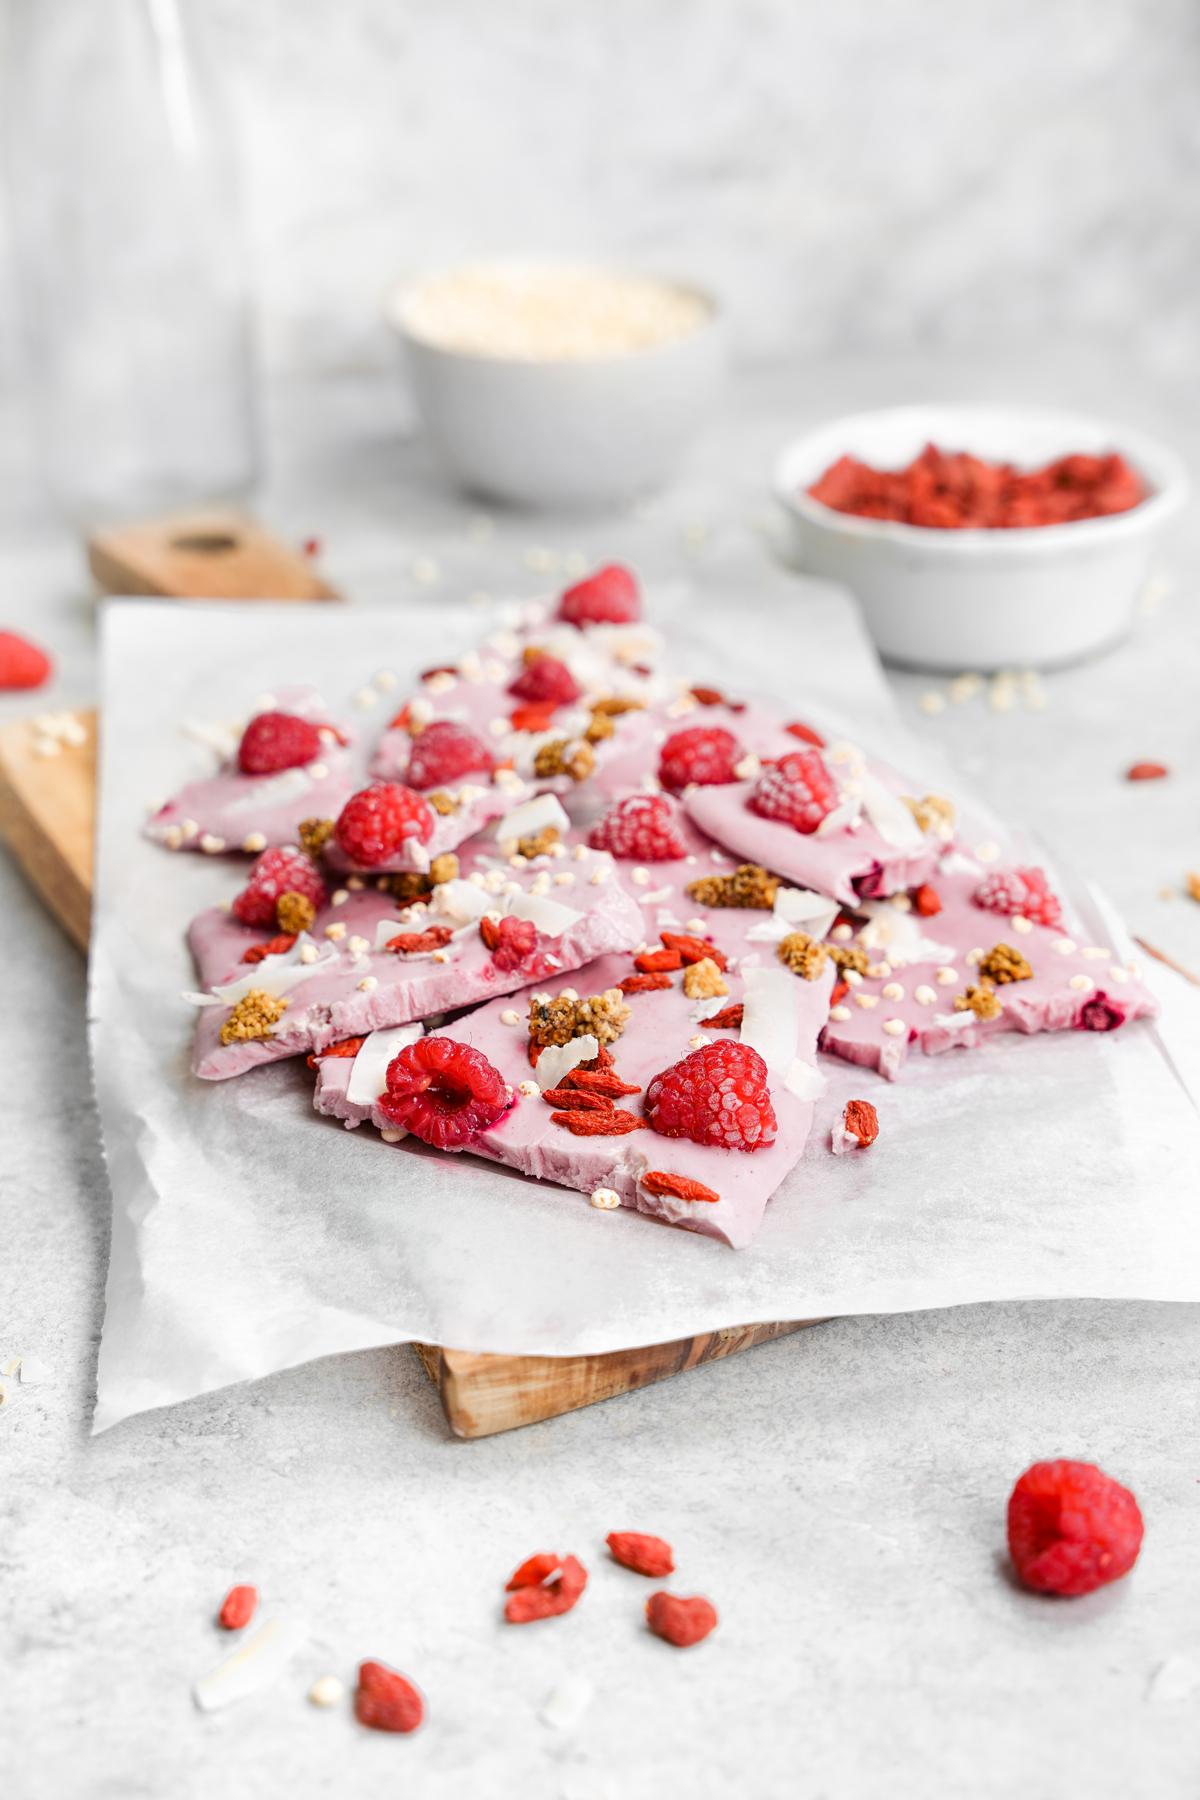 the superfood vegan yogurt bark stacked on top of each other with raspberries, mulberries, goji berries, and coconut on top